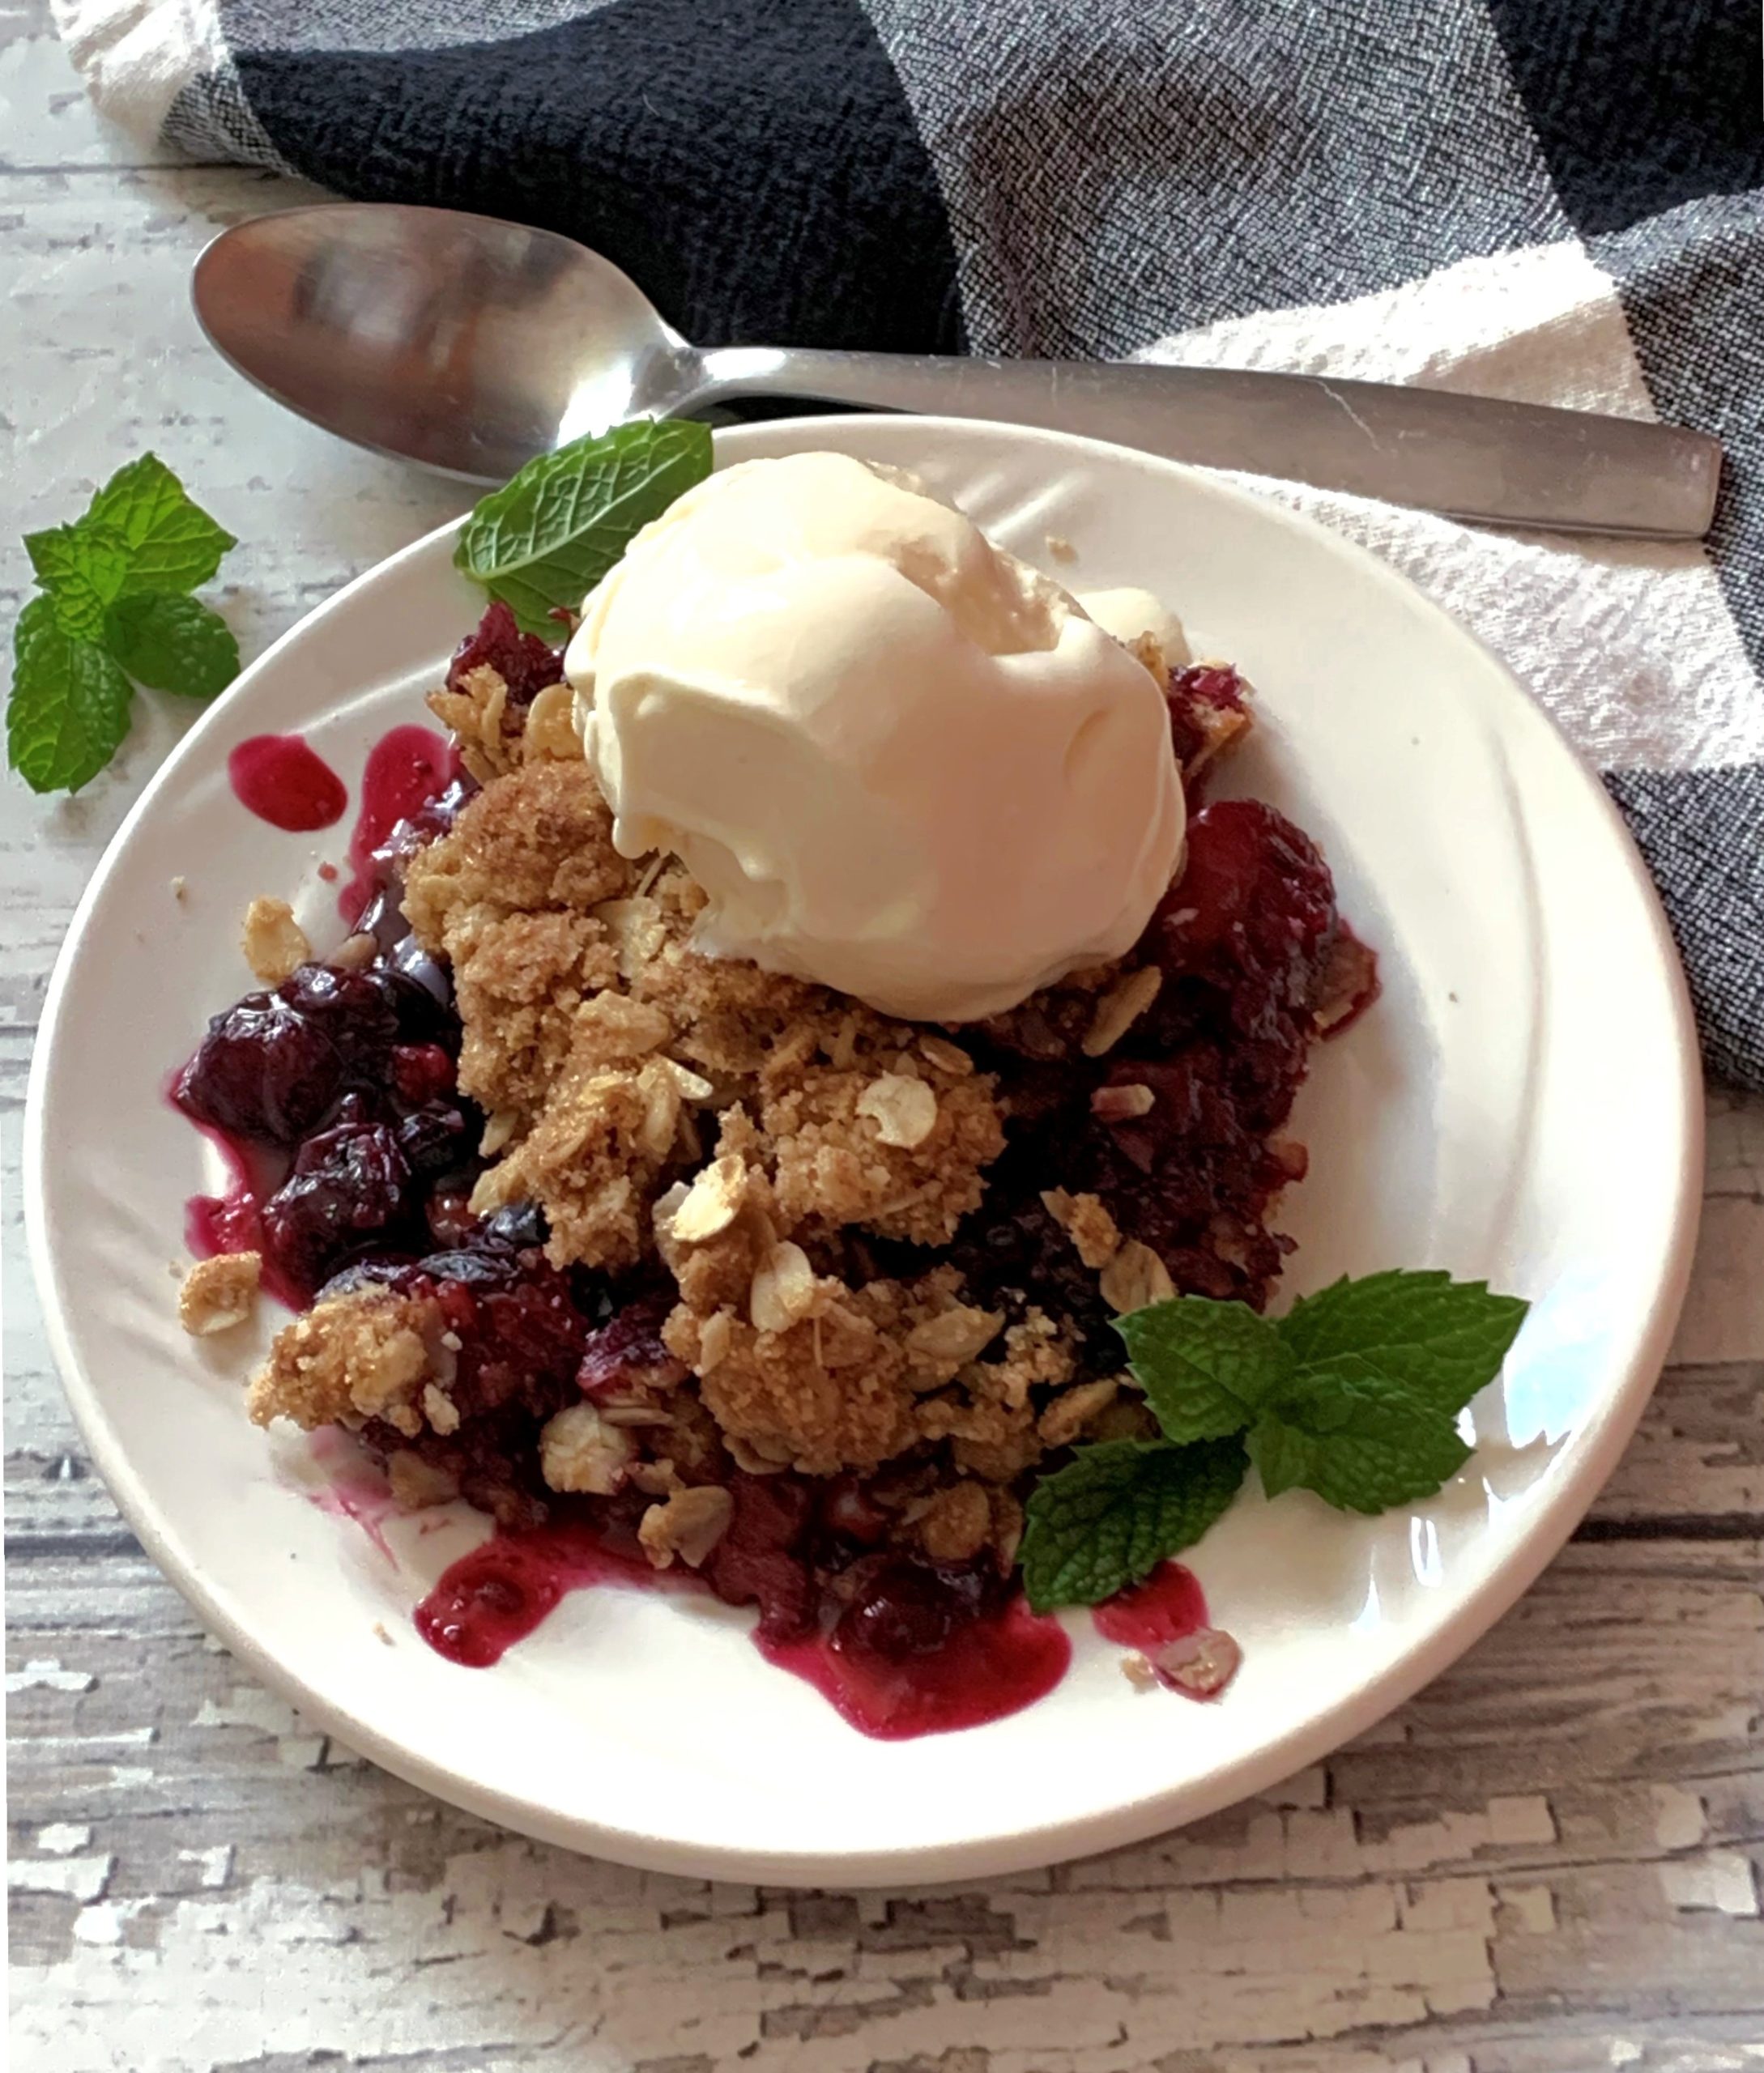 serving of mixed berry crisp topped with vanilla ice cream garnished with mint leaves